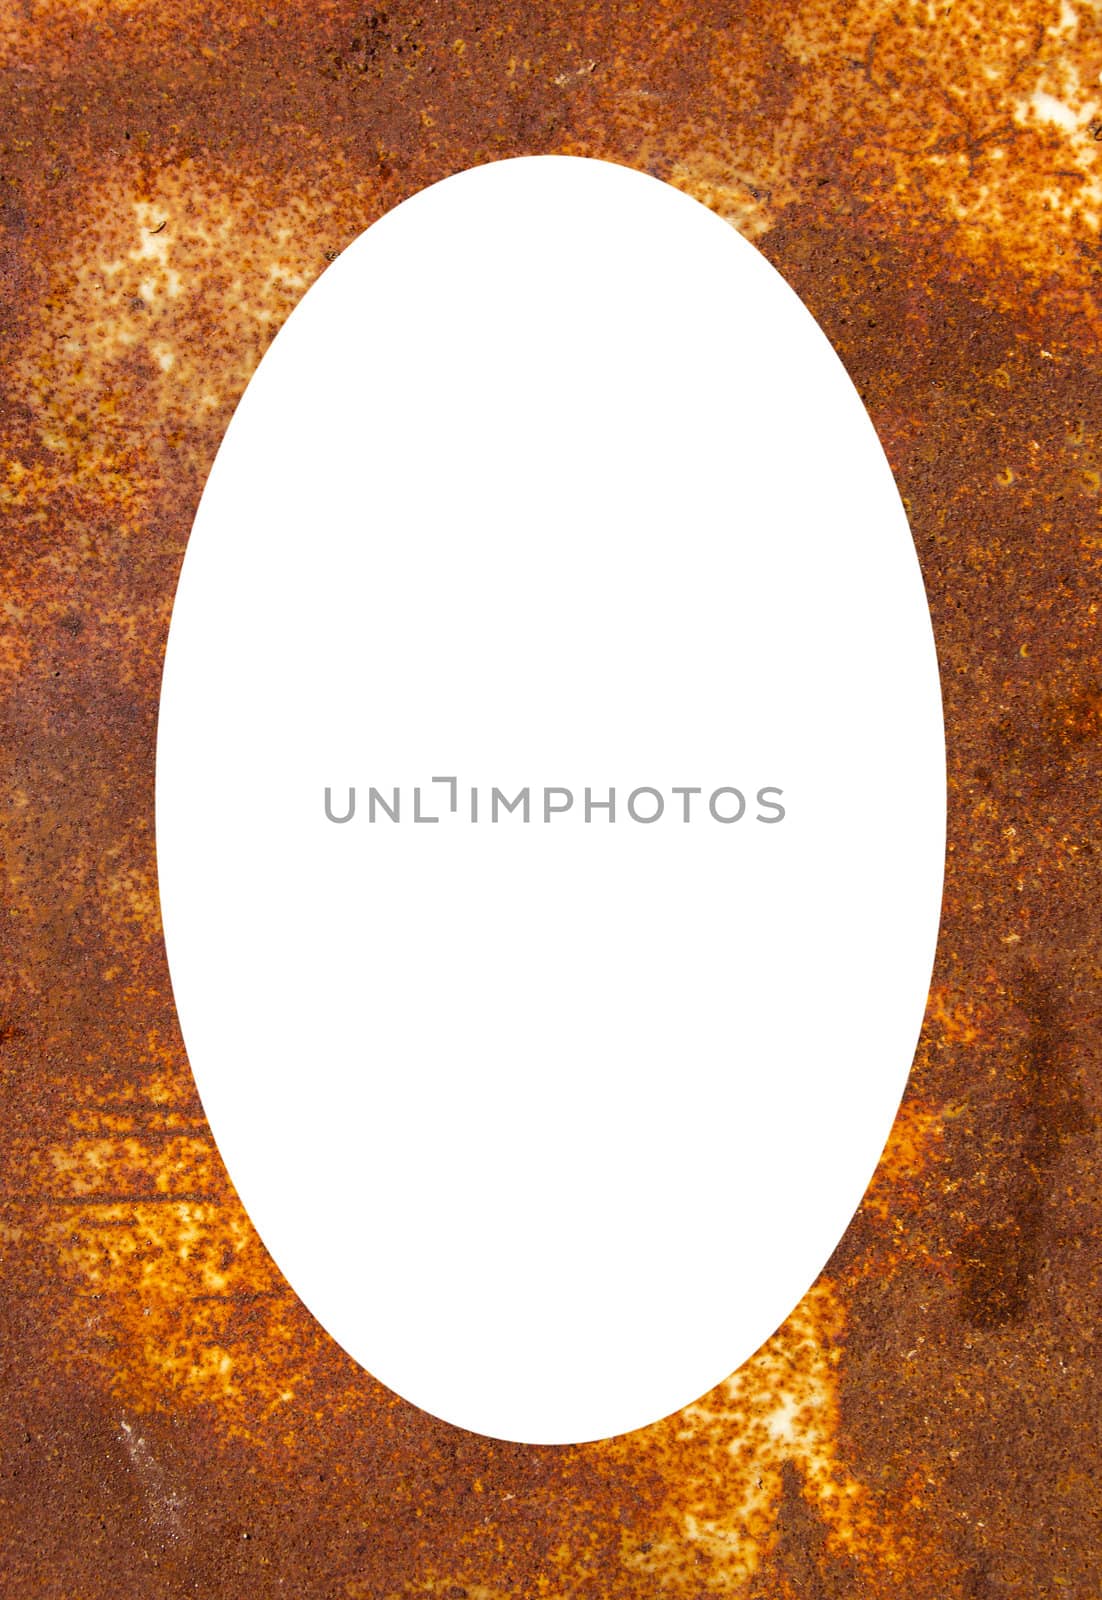 Rusty background. Tin corroded wall fragment backdrop. Isolated white oval place for text photograph image in center of frame.